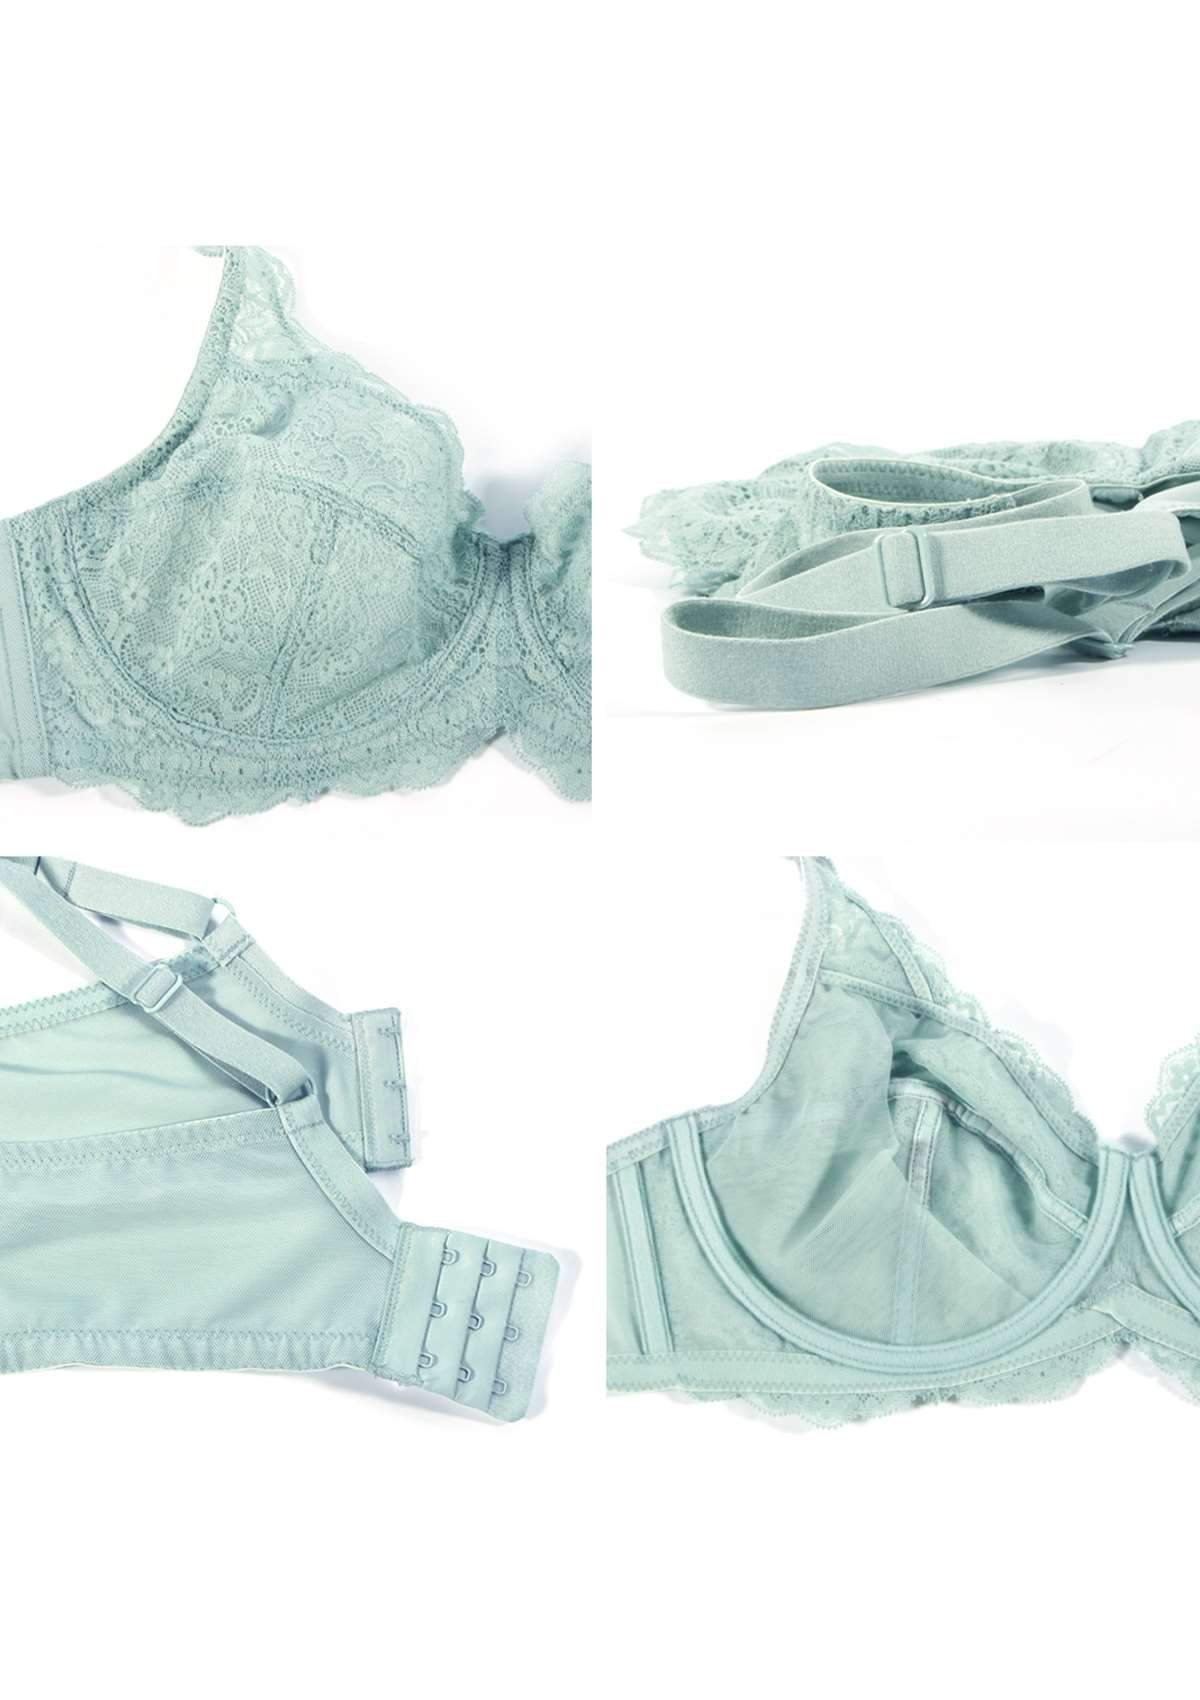 HSIA All-Over Floral Lace: Best Bra For Elderly With Sagging Breasts - Pewter Blue / 42 / D